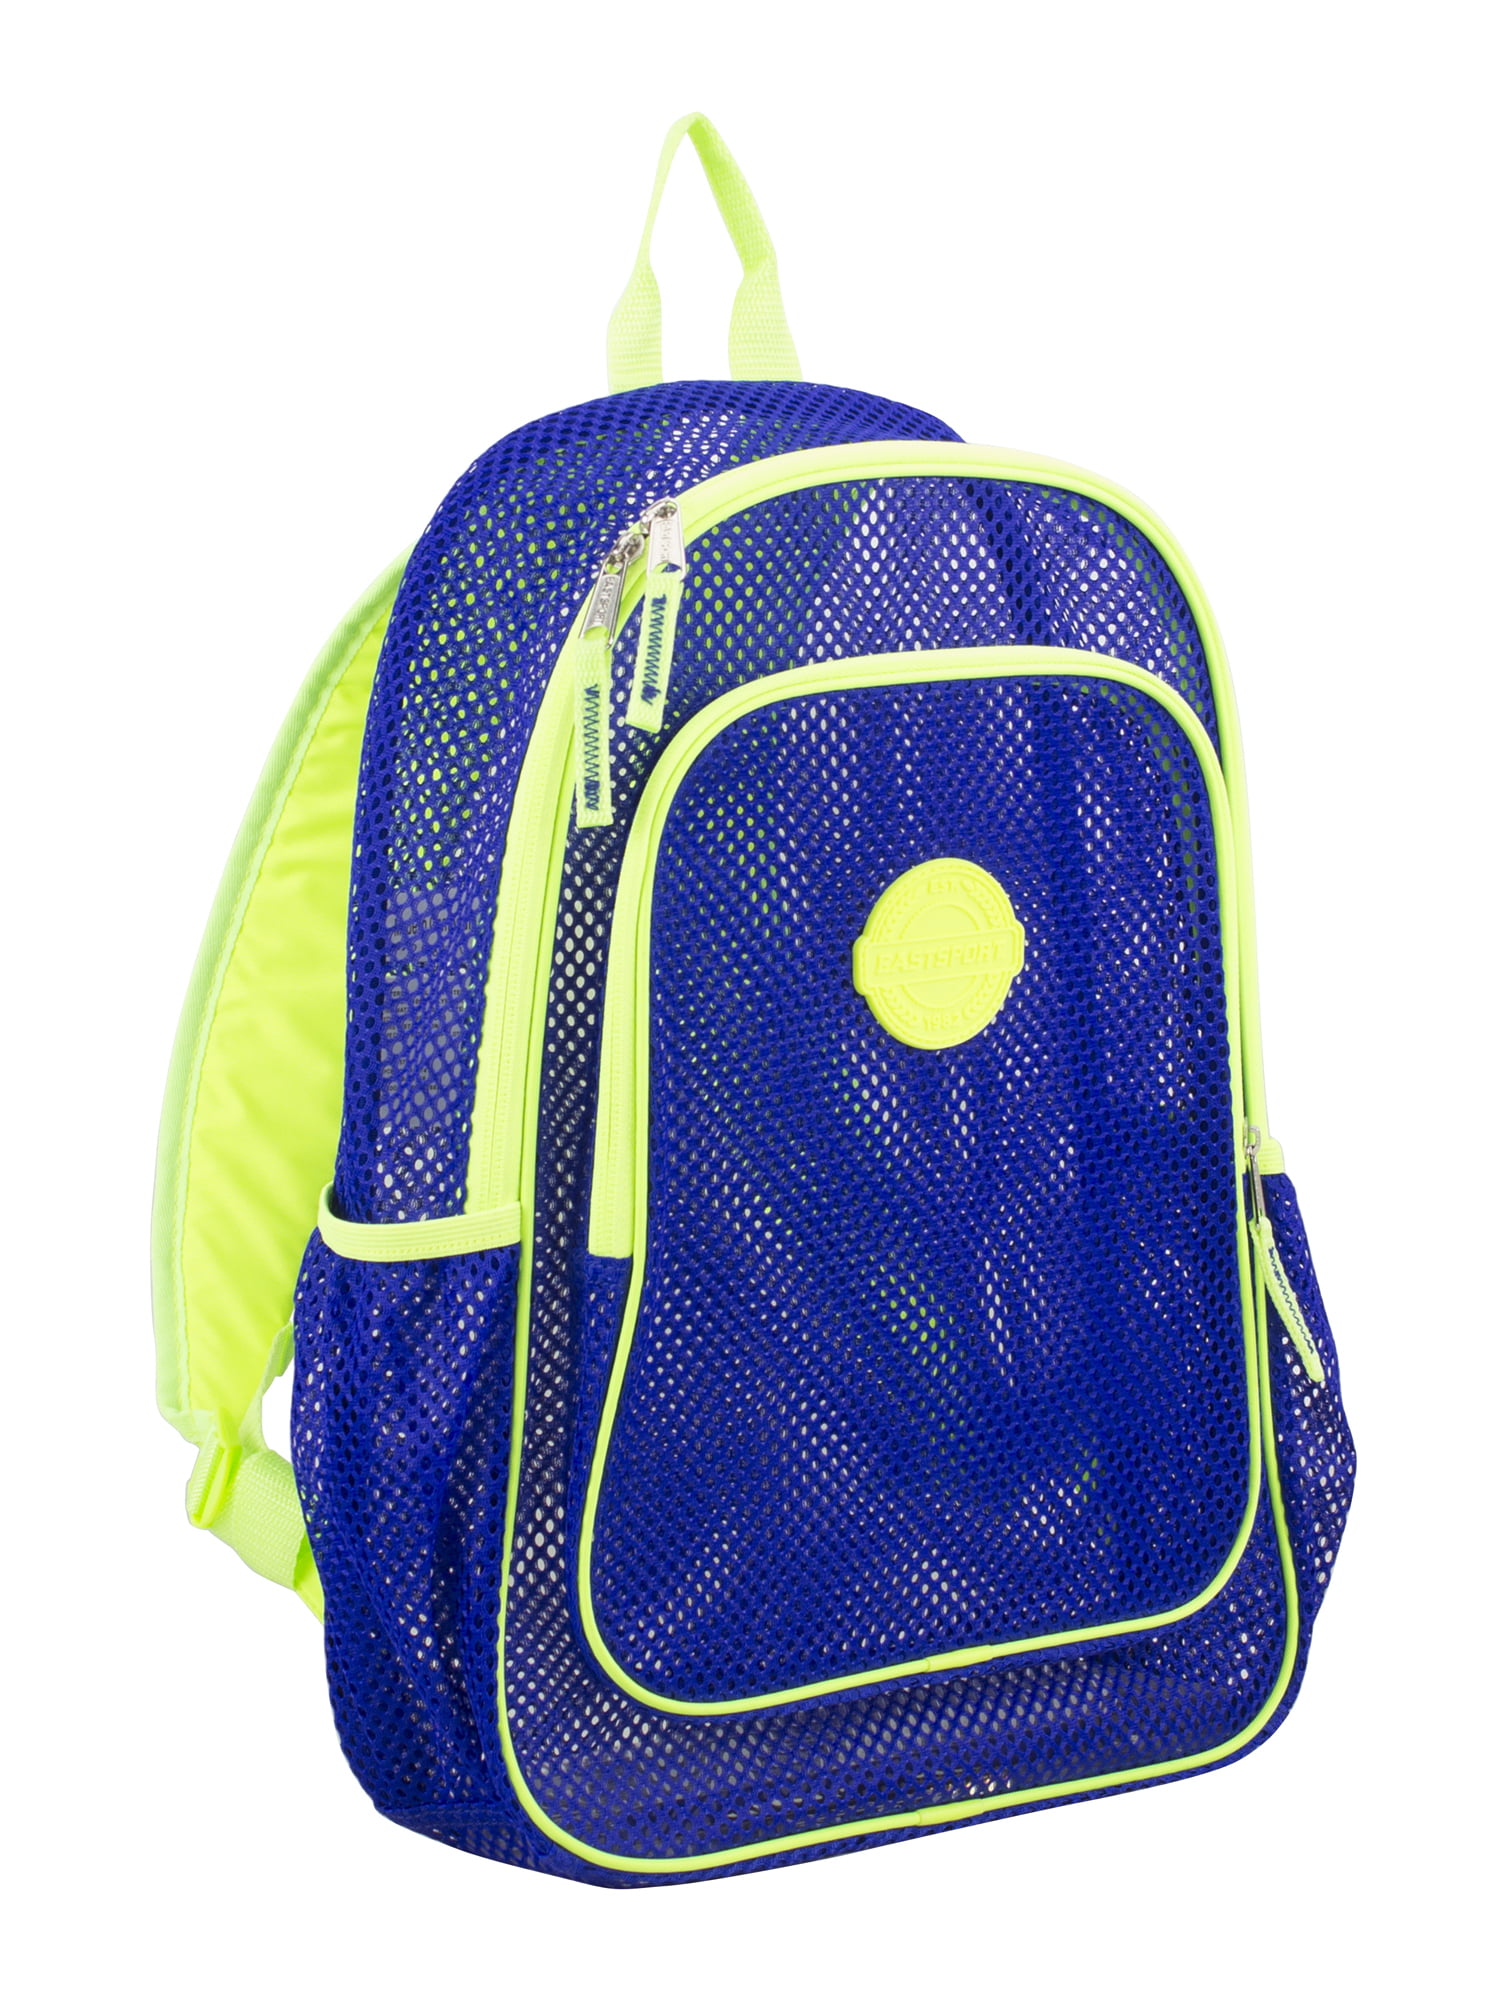 Eastsport Unisex Multi-Purpose Mesh Backpack with Front Pocket Deep Sea Neon  Yellow 